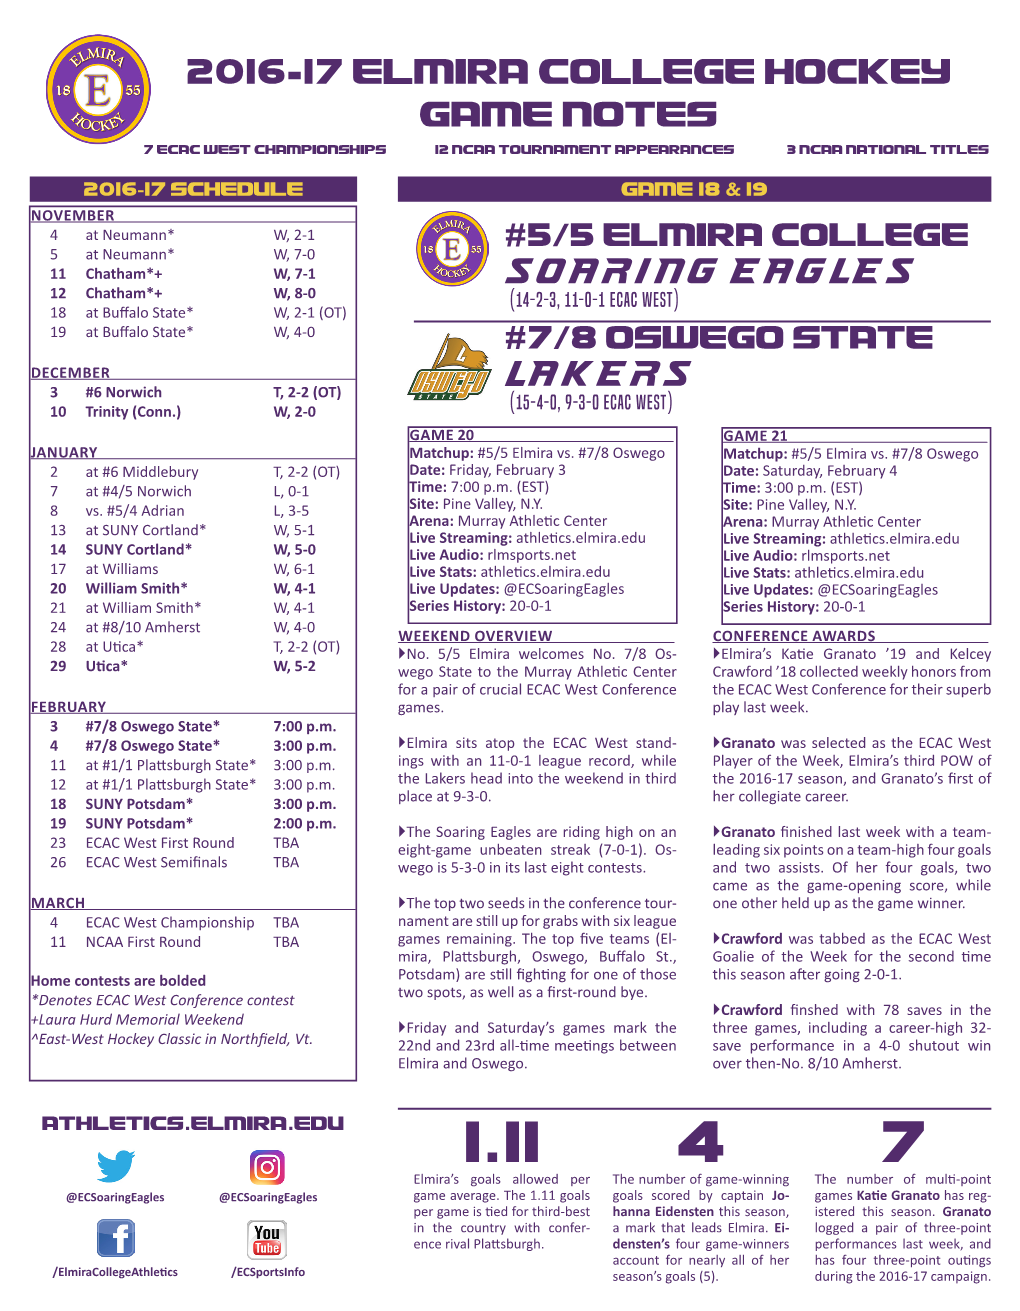 2016-17 Elmira College HOCKEY GAME NOTES Soaring Eagles